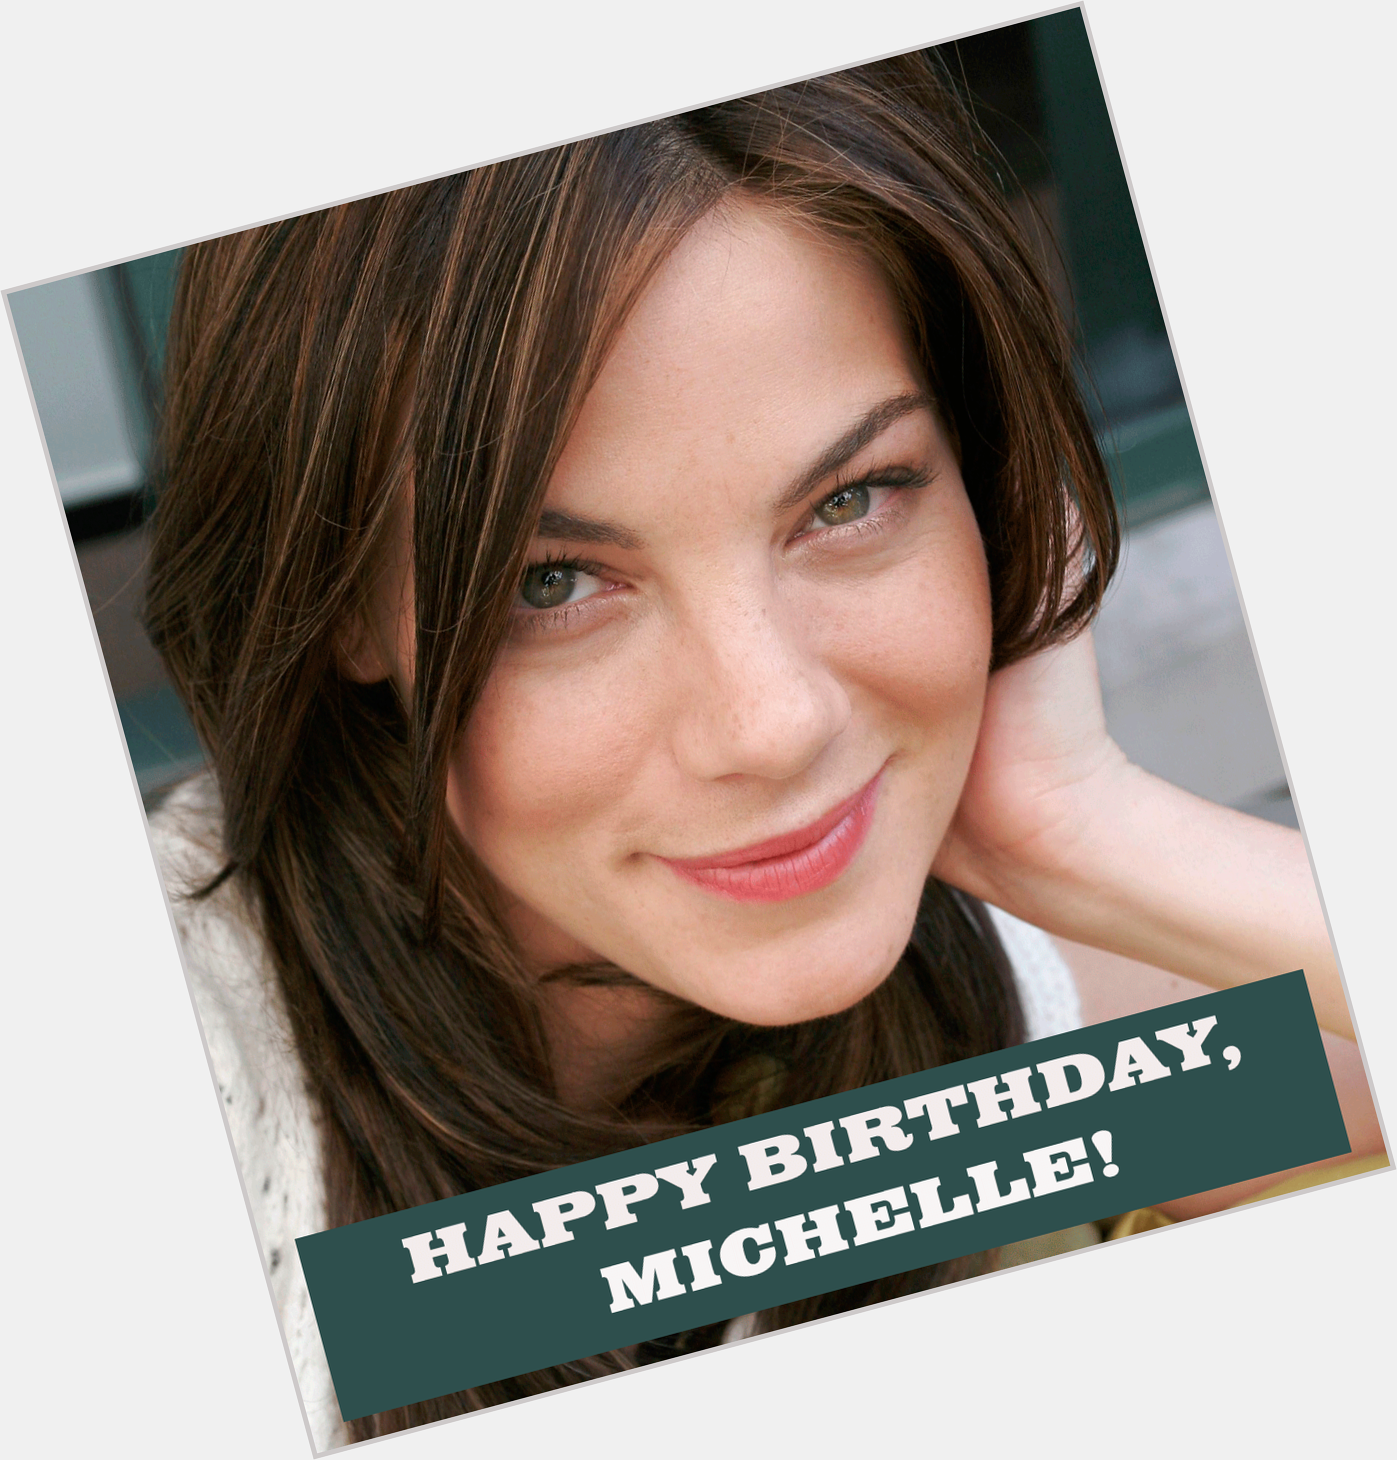 Movie Loft sending out a happy birthday to Michelle Monaghan. Great job in Fort Bliss.  